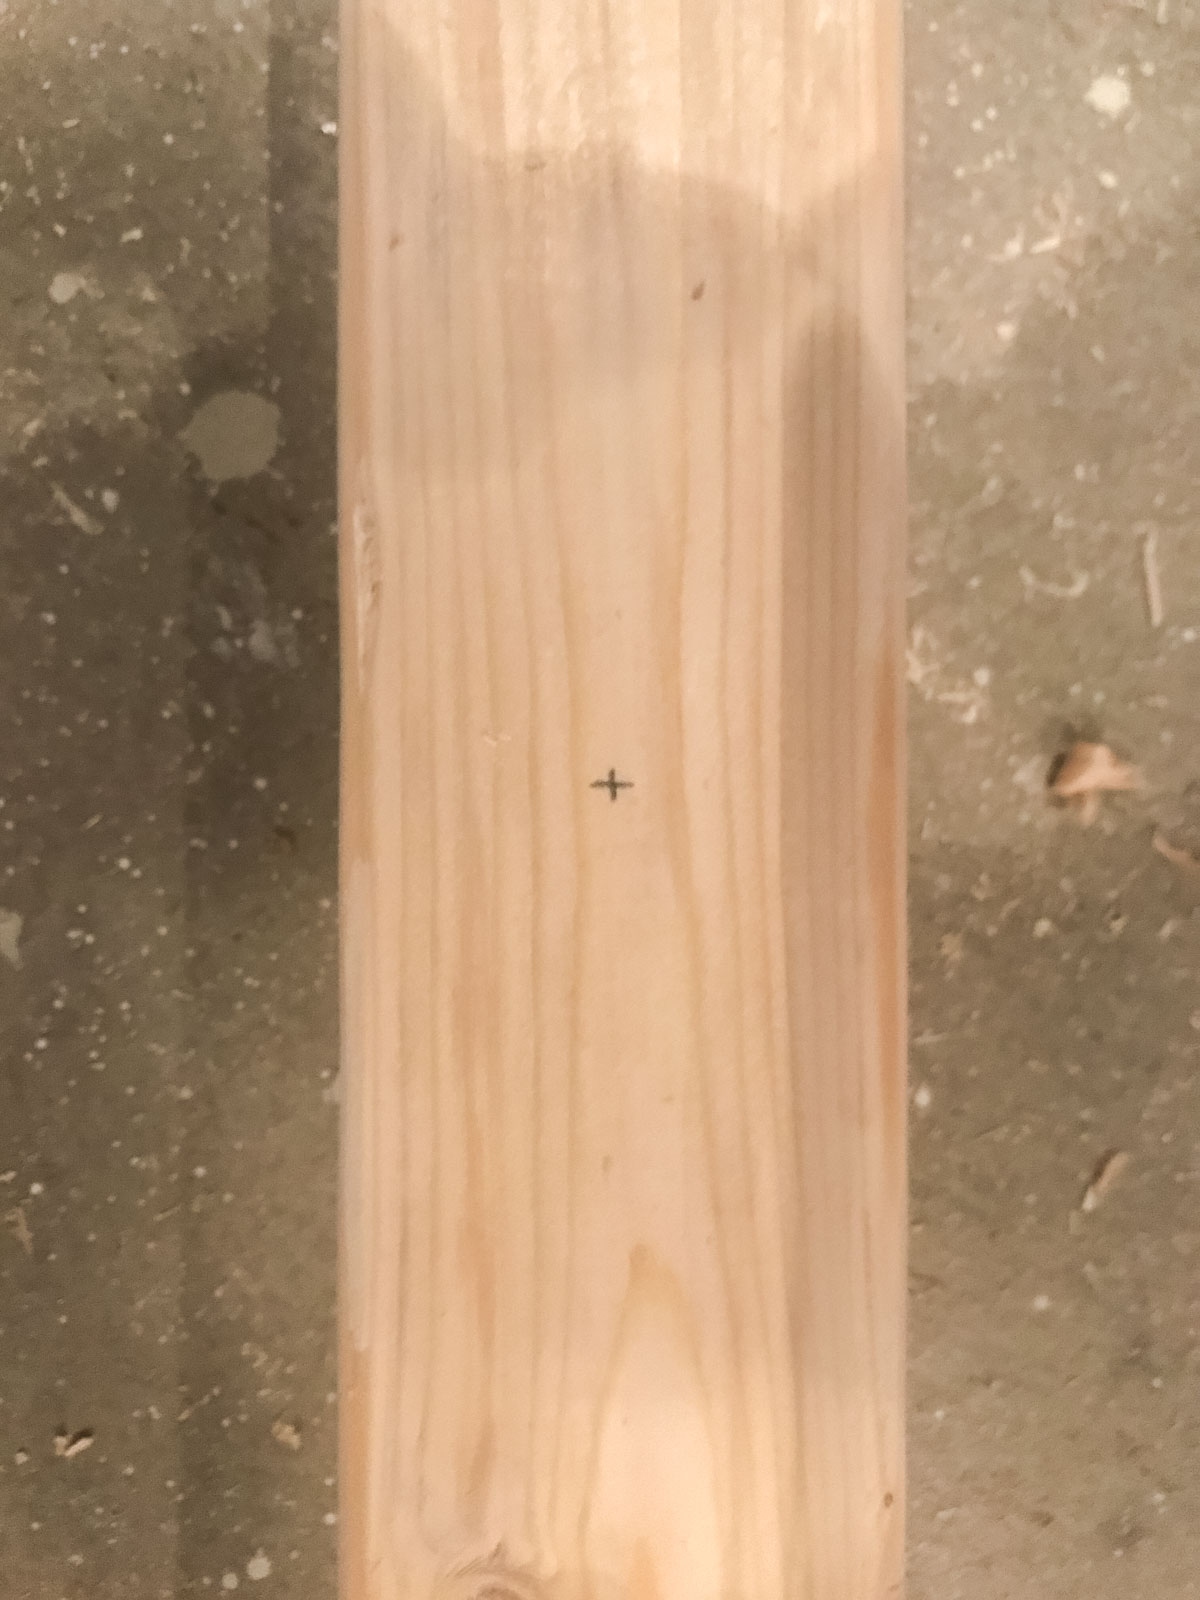 middle of 2x3 wood marked for drilling